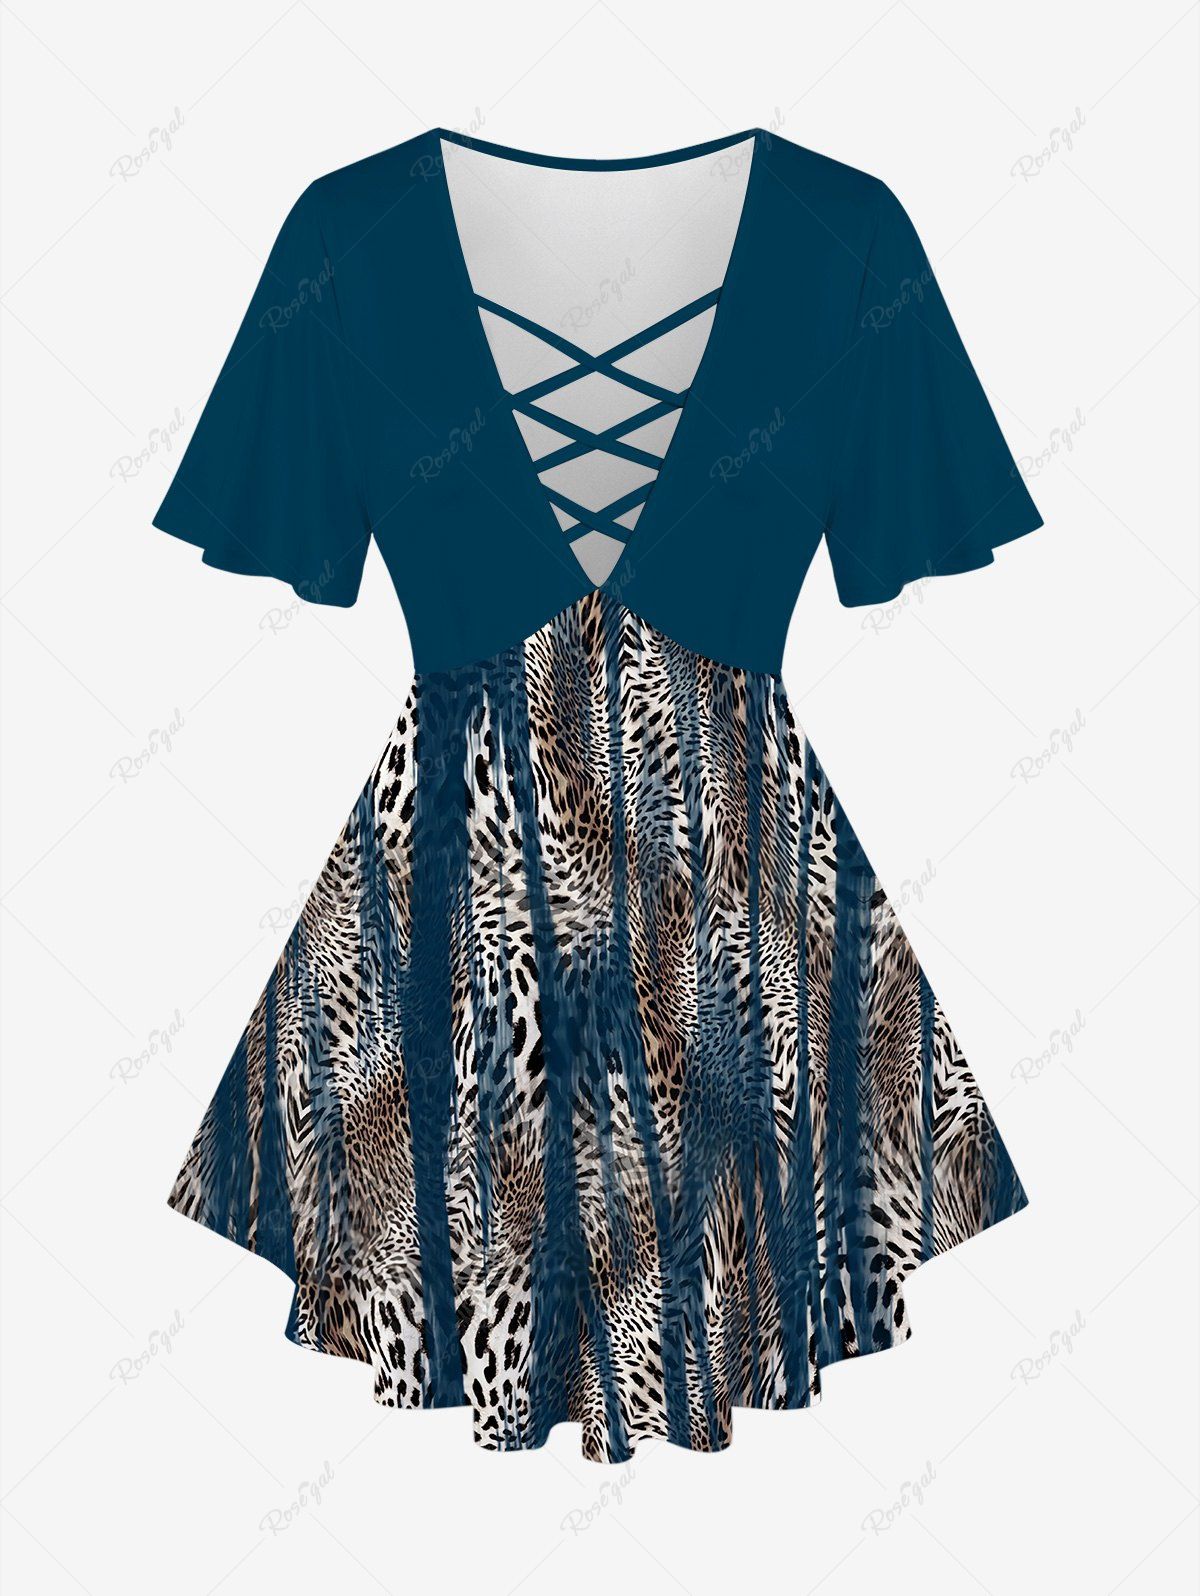 Chic Plus Size Leopard Printed Crisscross Short Sleeves Plunging Tee  